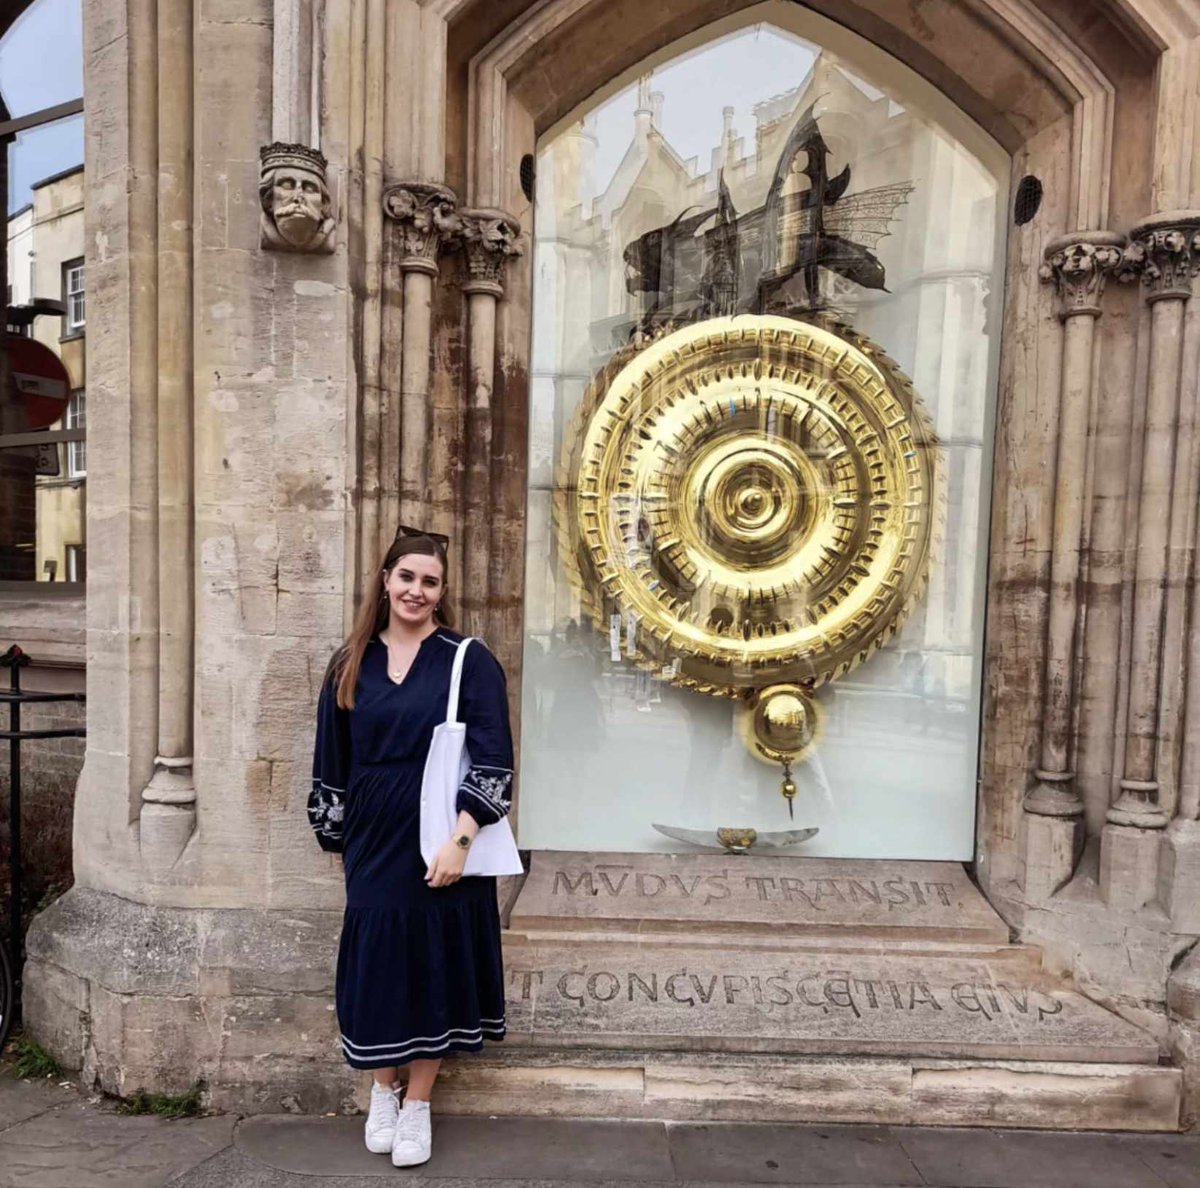 I had to stop at the Corpus Clock to see the chronophage while in Cambridge for the #UKClockClub autumn meeting last week. Grateful for the engaging conversations and insights at my poster and to organisers for a fab meeting! #retinarhythms